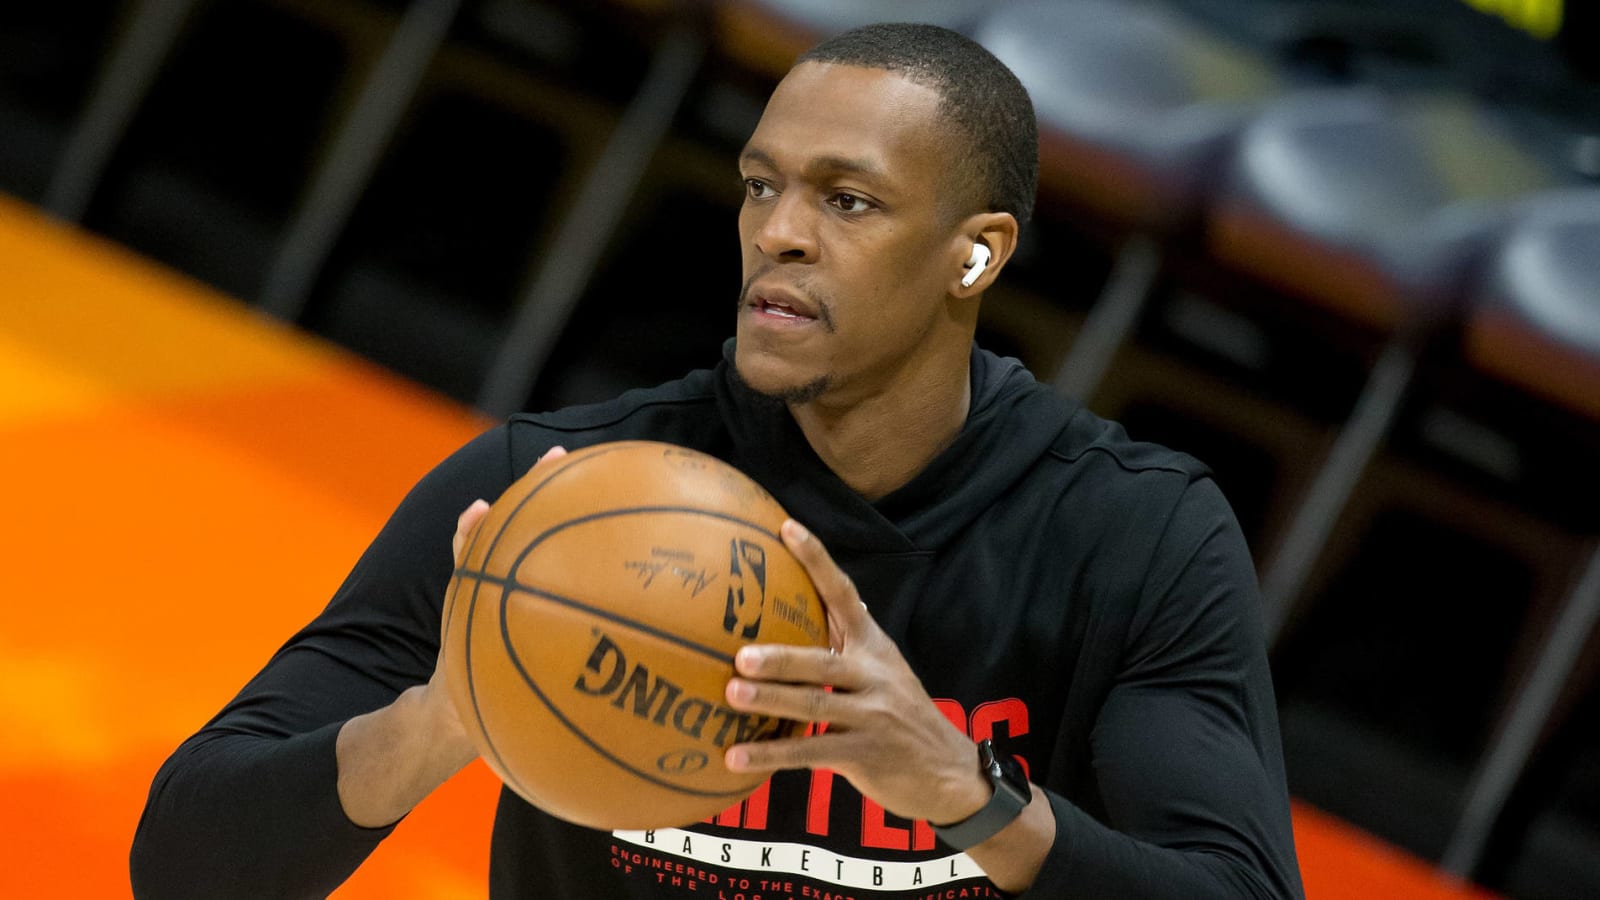 Rajon Rondo to sign one-year deal with Lakers